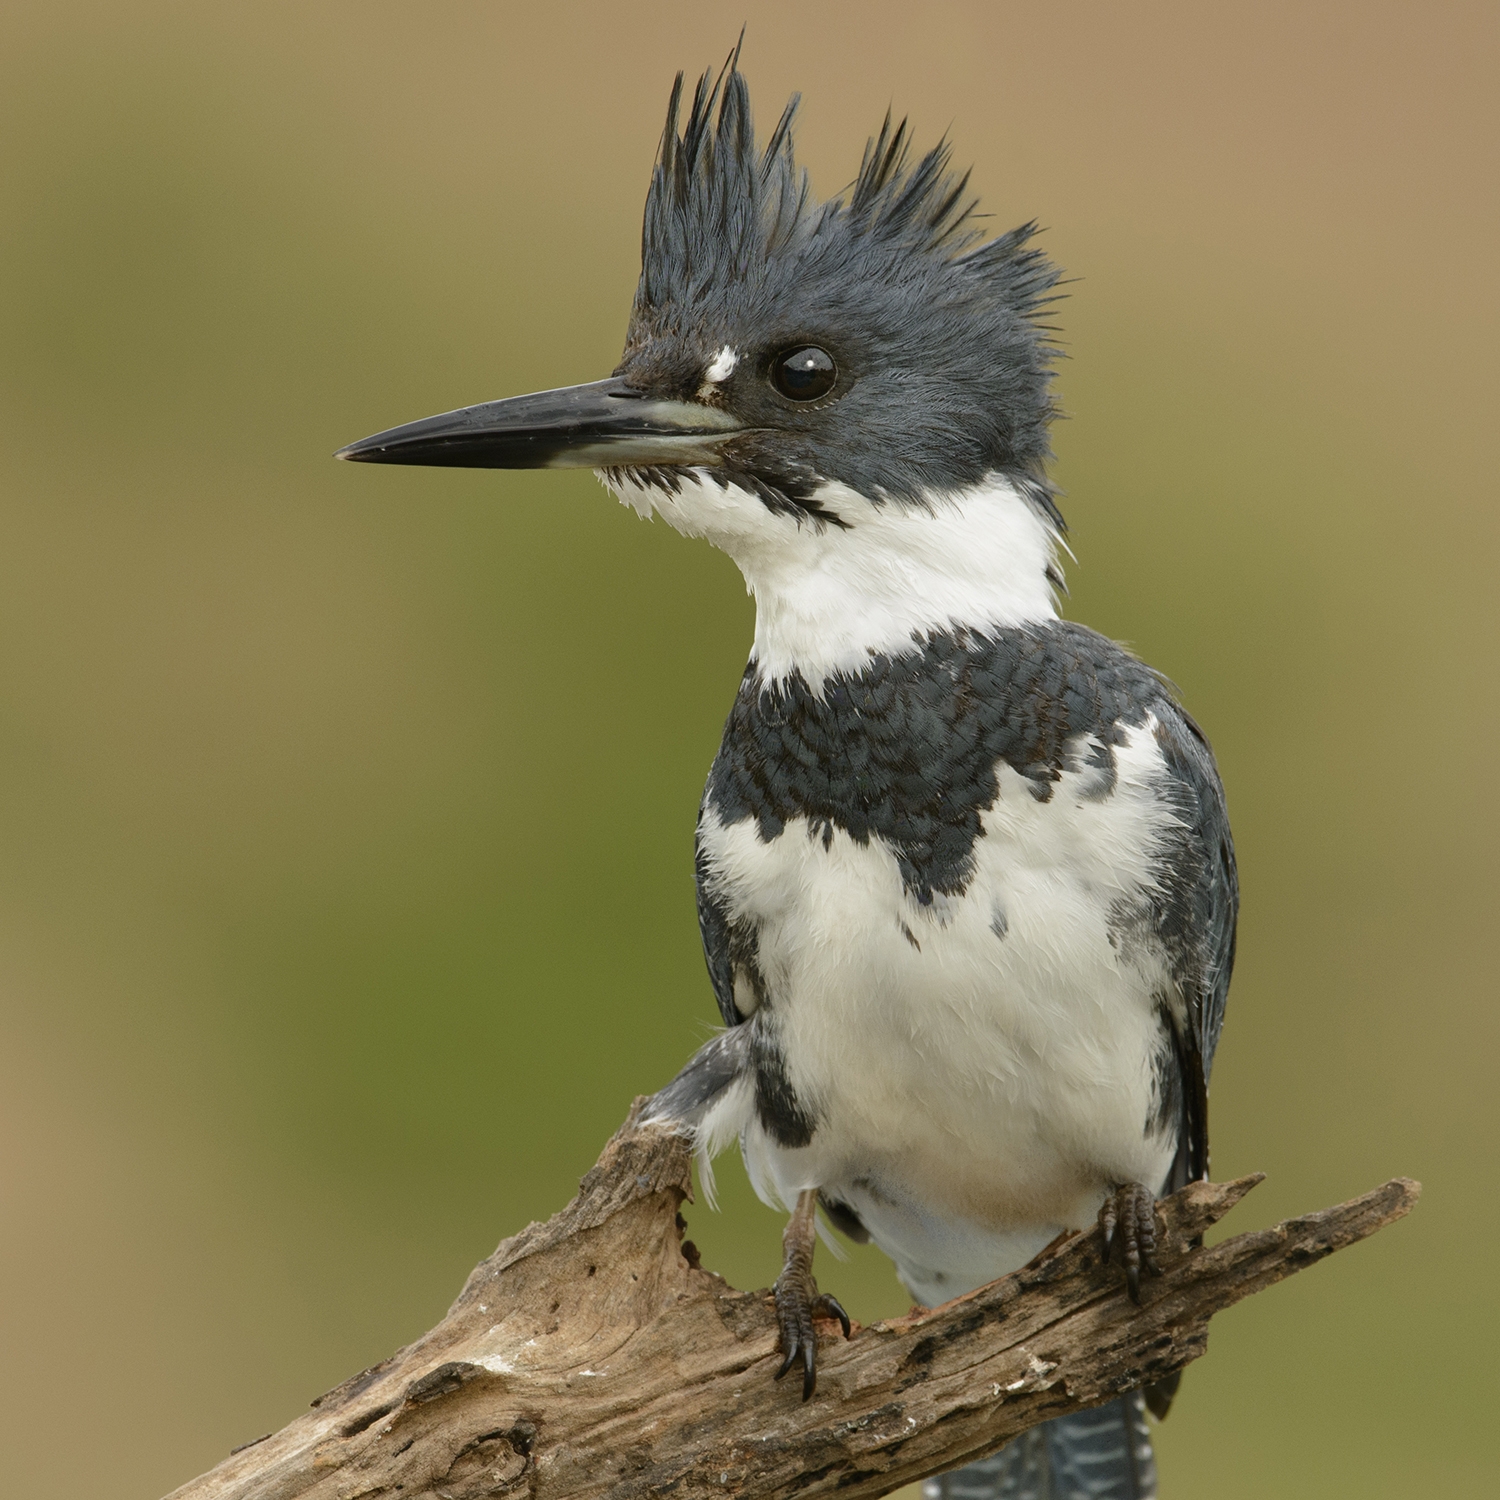 belted kingfisher (Ceryle alcyon)